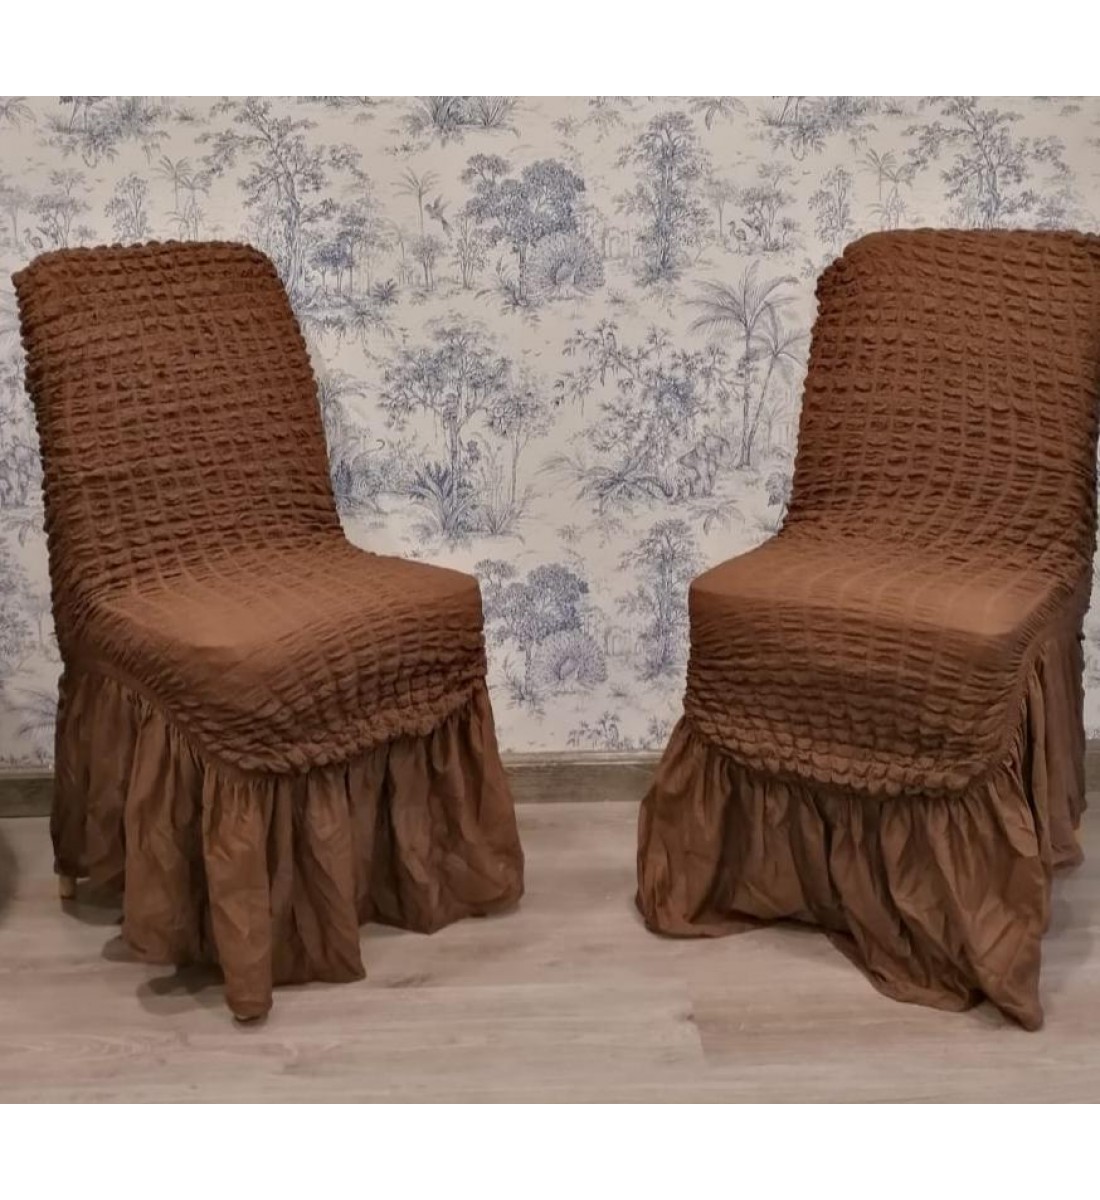 Sofa Chairs Cover 6 pieces, brown color